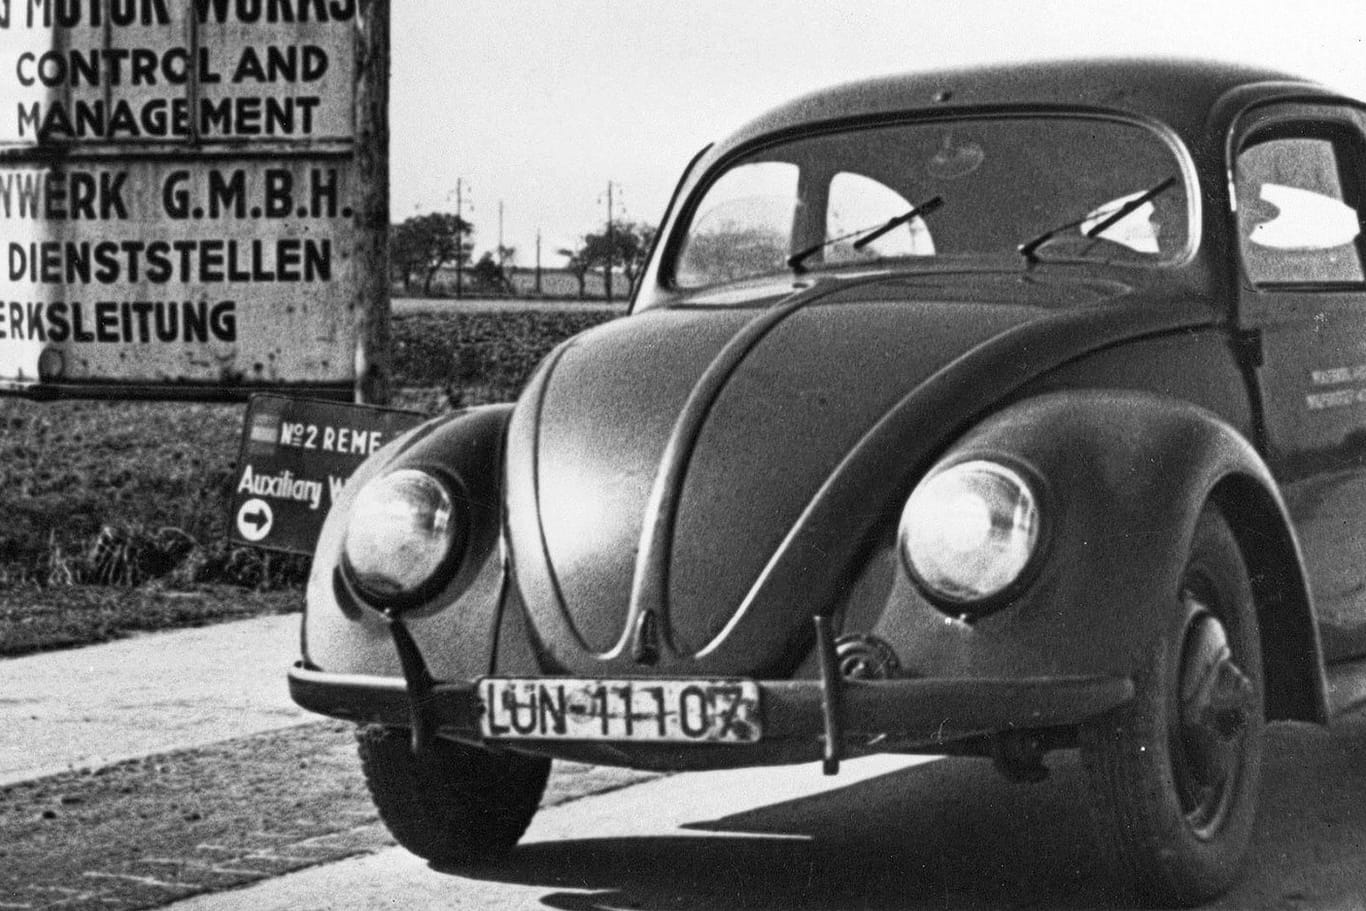 Production launch for an icon: The first VW Beetle rolled off the line at the Wolfsburg plant 70 years ago